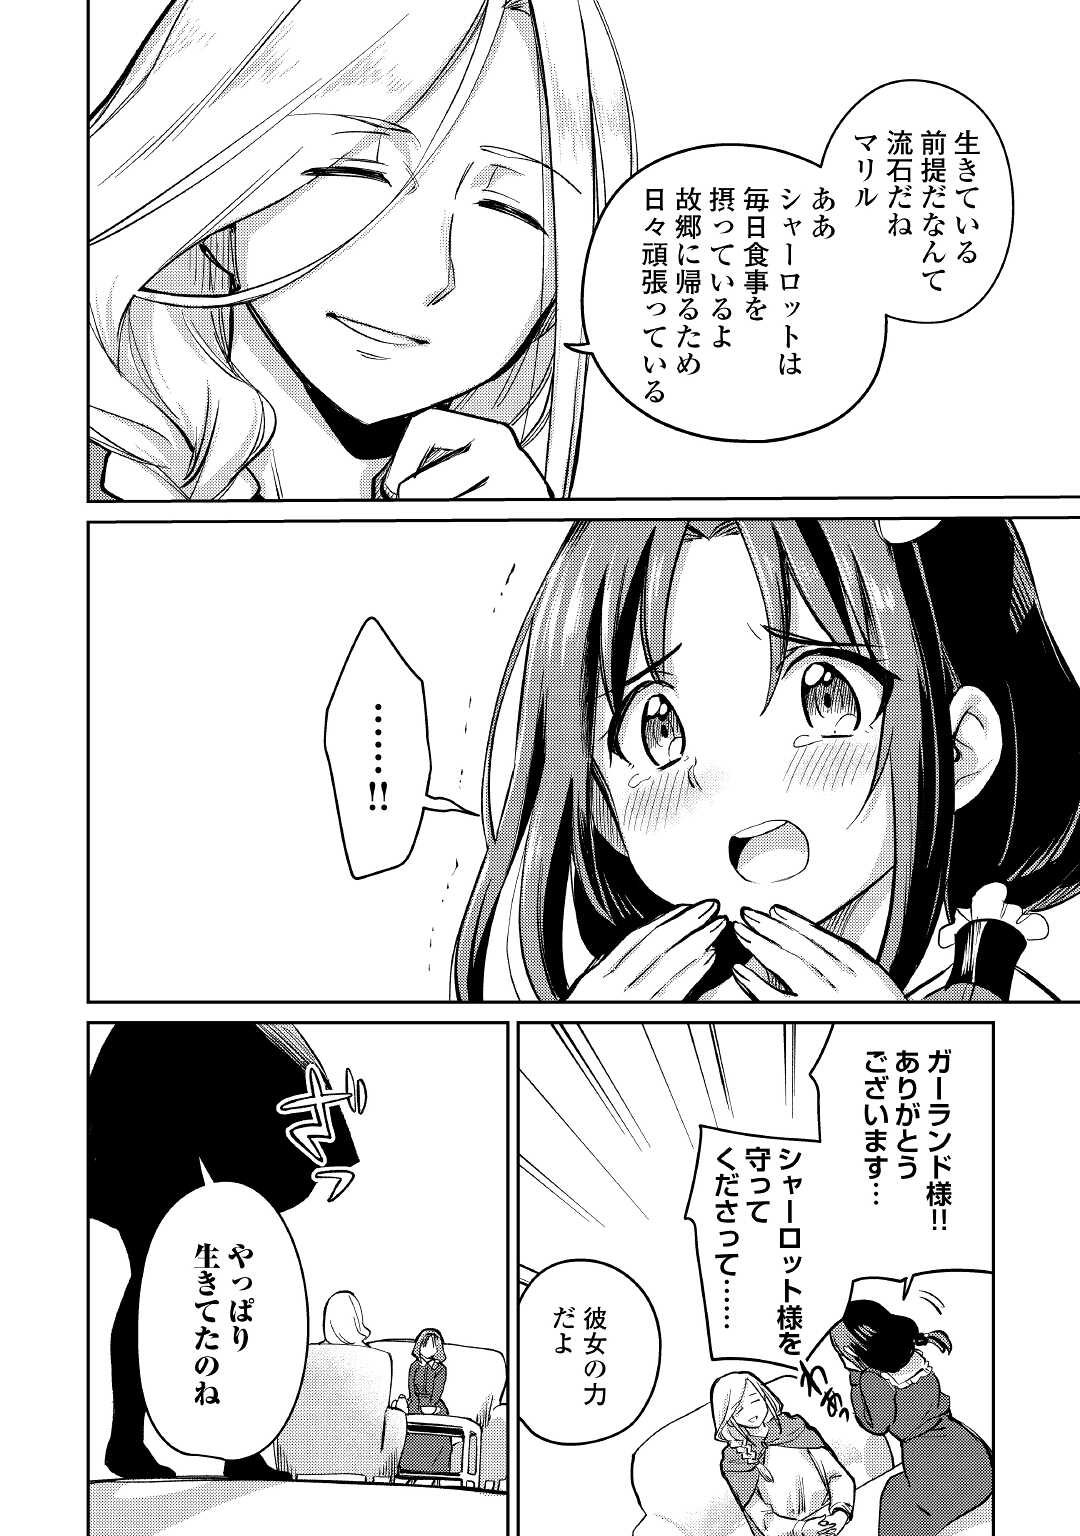 The Former Structural Researcher’s Story of Otherworldly Adventure 第35話 - Page 6